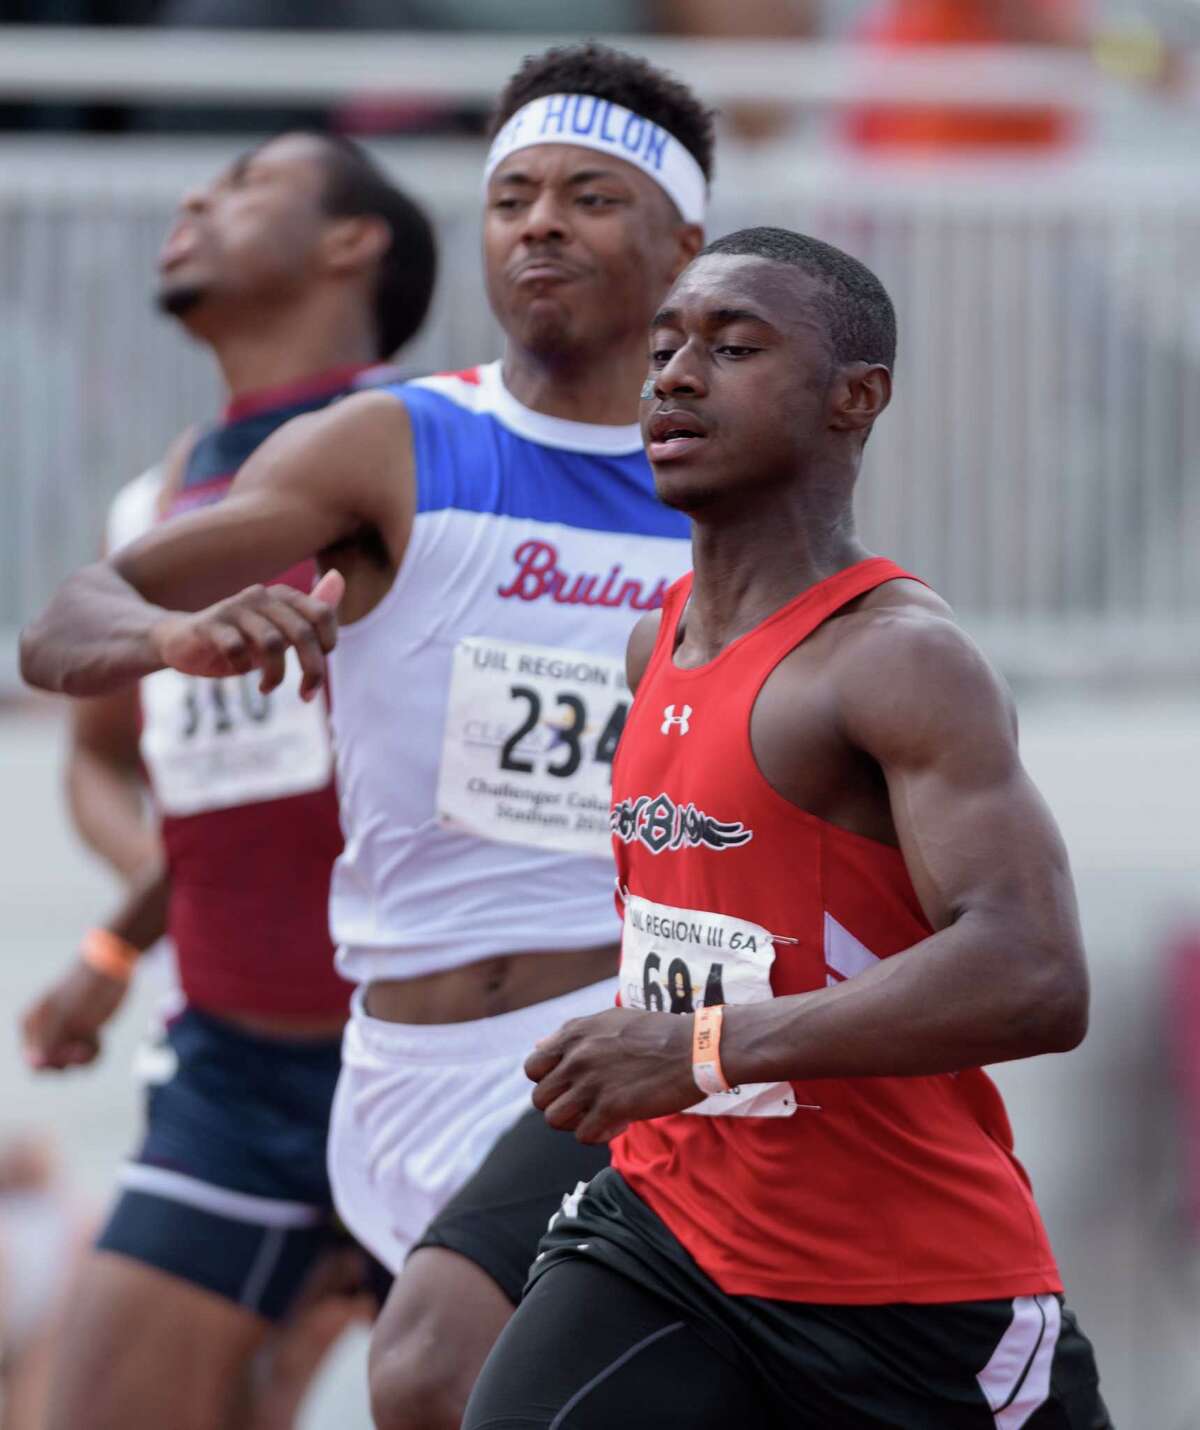 Brandon Taylor of Clear Brook High School won the Boy's 100 Meter Dash at the 6A Region III Championships on Saturday, April 30, 2016 at the Challenger Columbia Stadium.